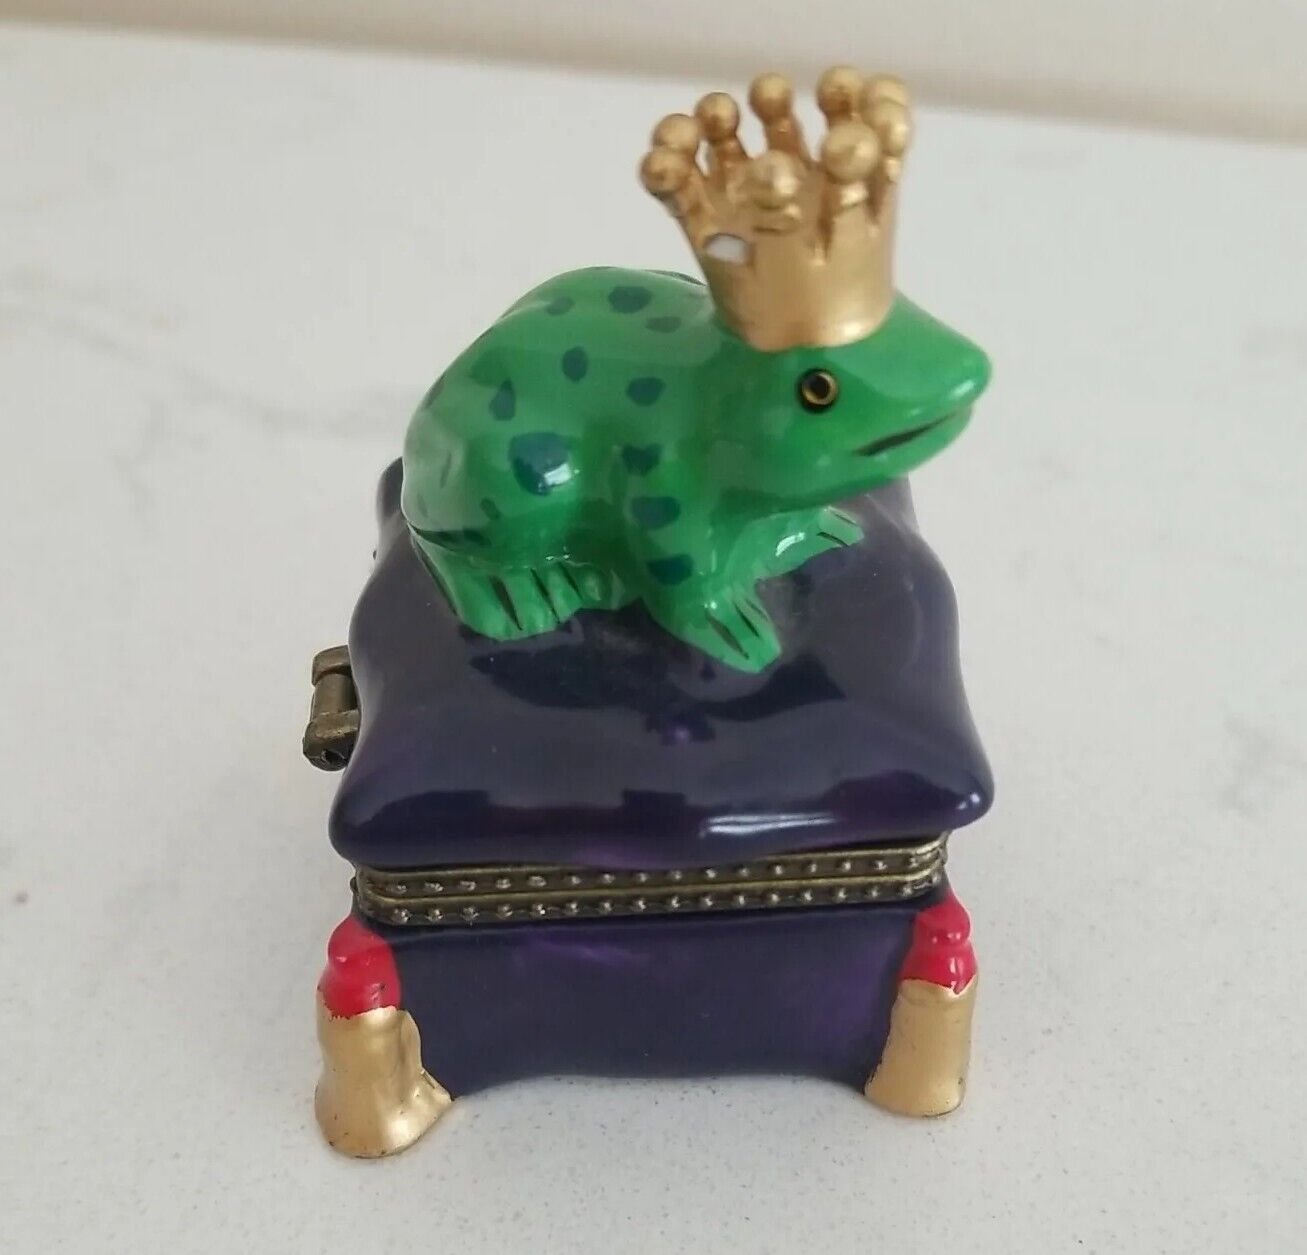 Trinket Box, Frog Hinged Trinket Box With Price Charming Inside  Whimsical, Cute